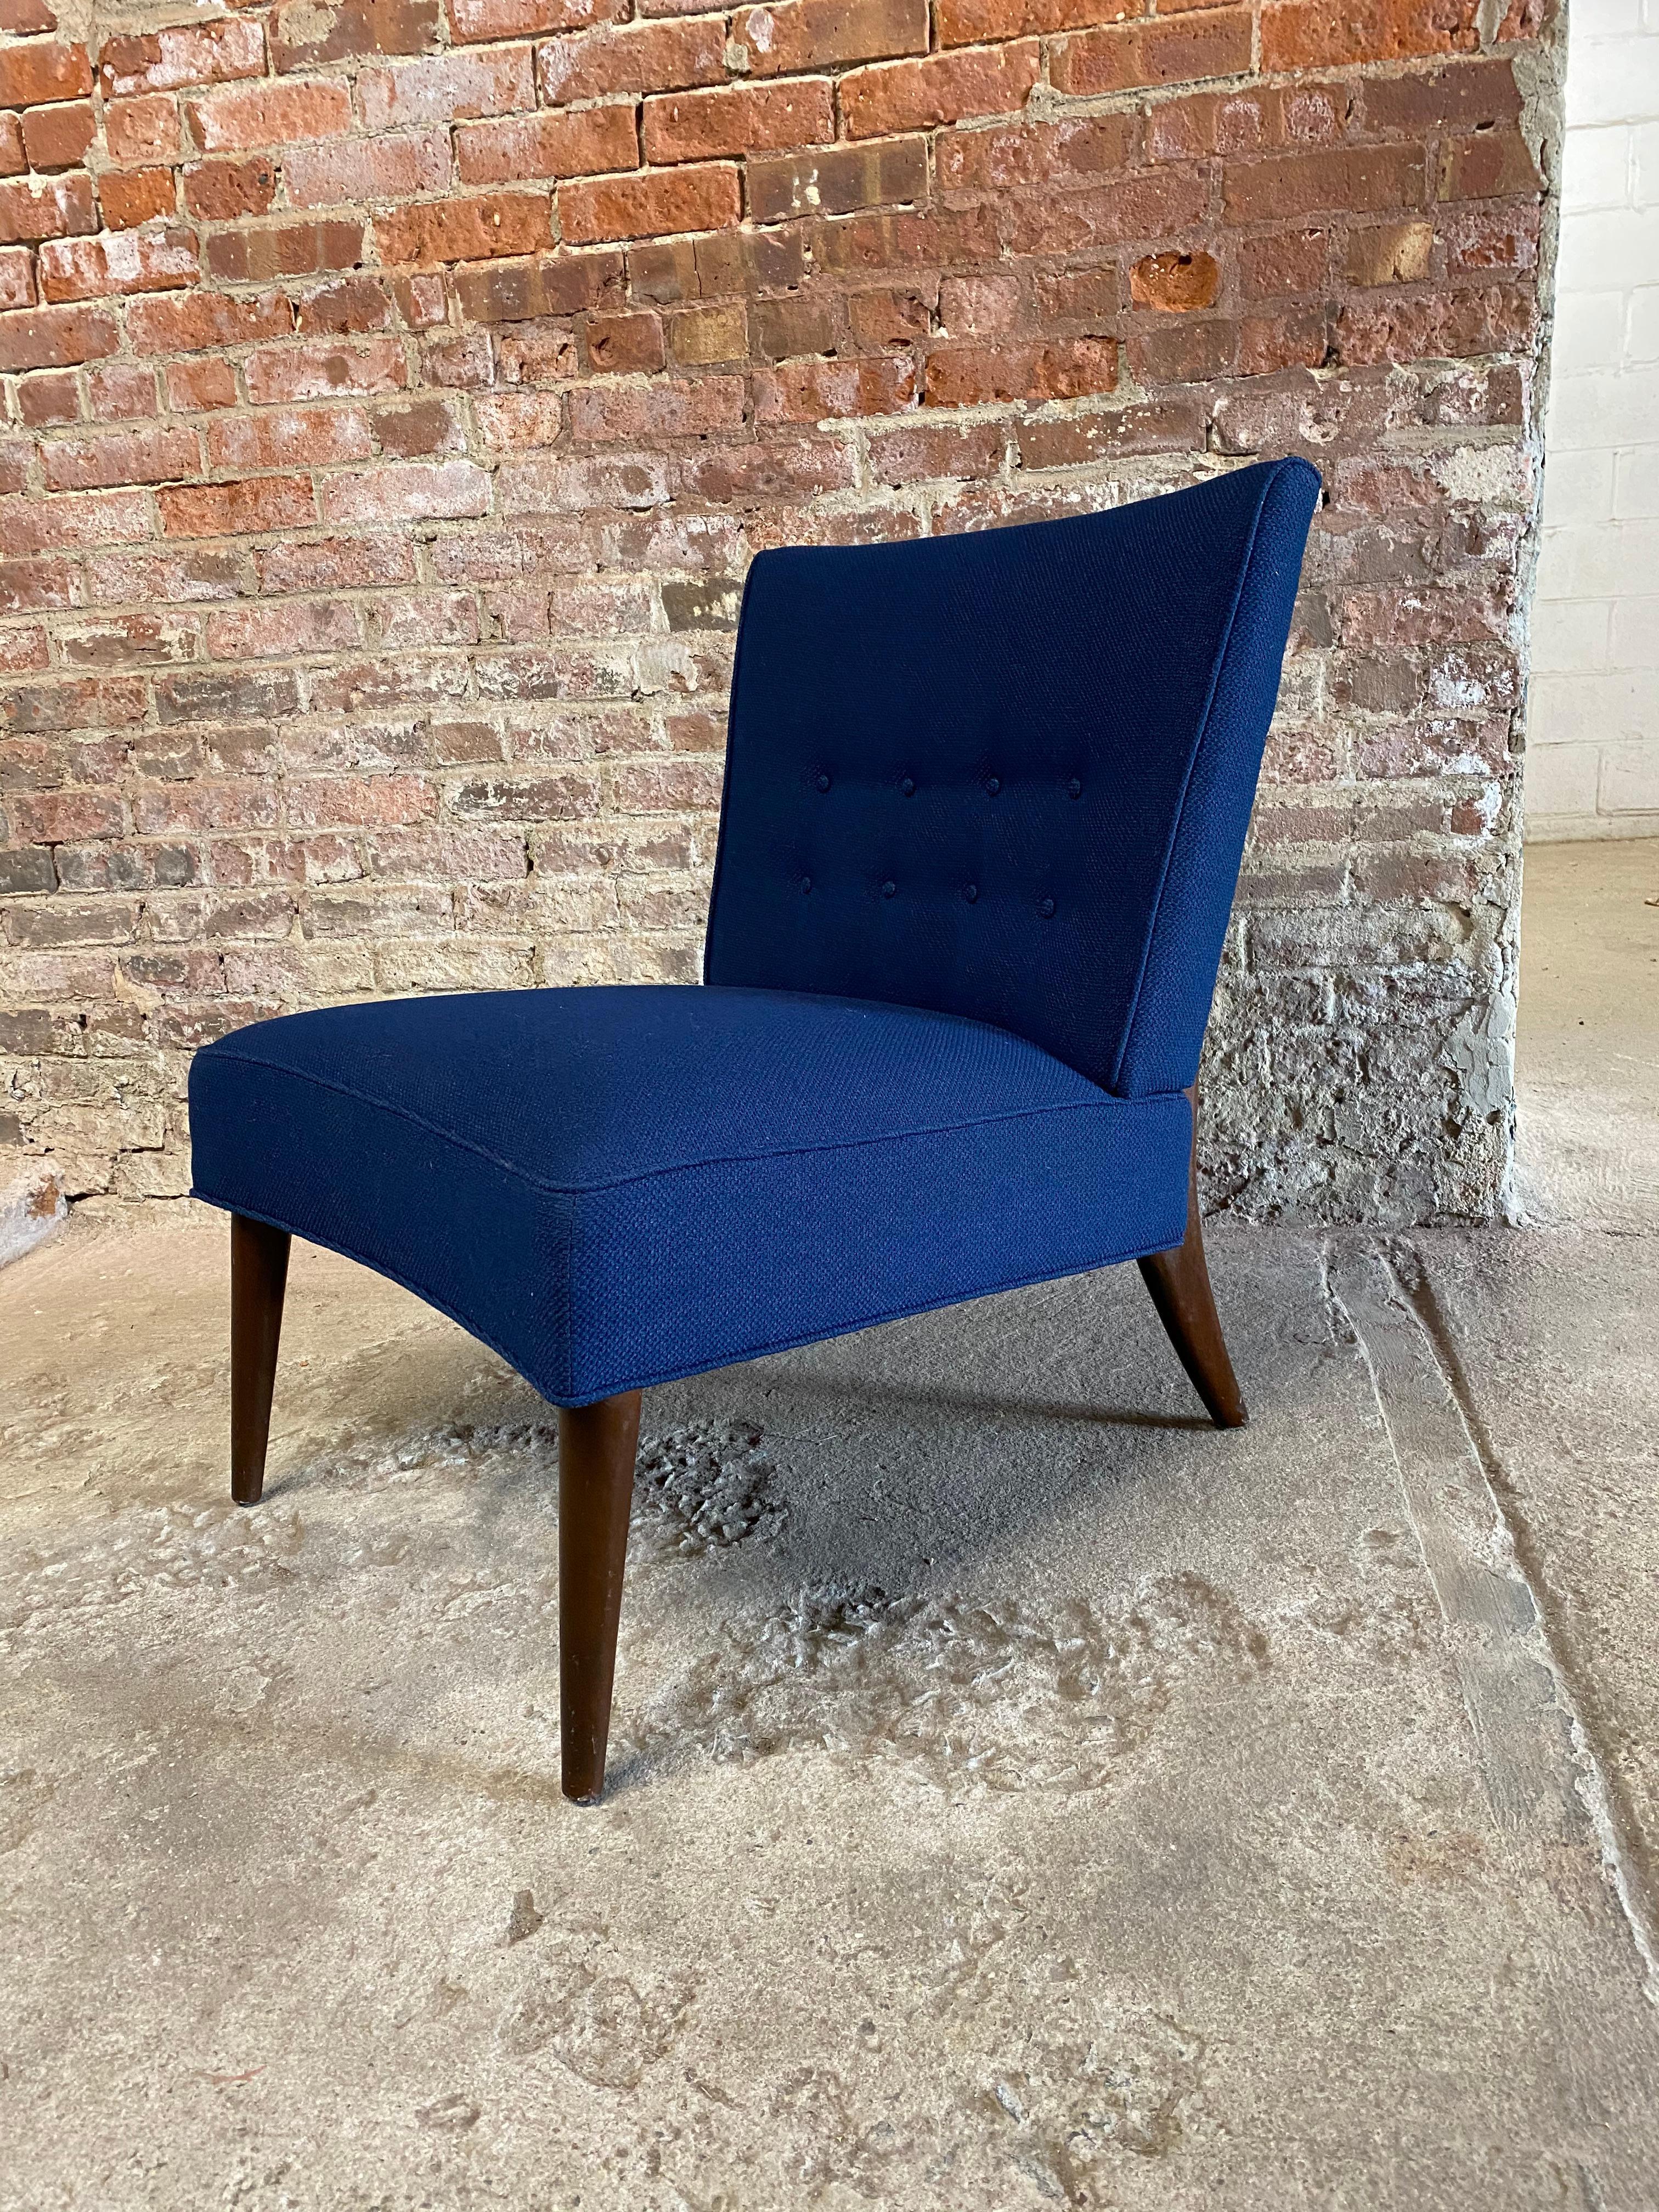 Freshly upholstered in navy blue boucle fabric. Featuring a button tufted back rest, tapered front legs and rear saber legs. Valentine Seaver Originals for Kroehler. Structurally sound and sturdy frame. Maximum comfort, Circa 1950-60.

Approximate